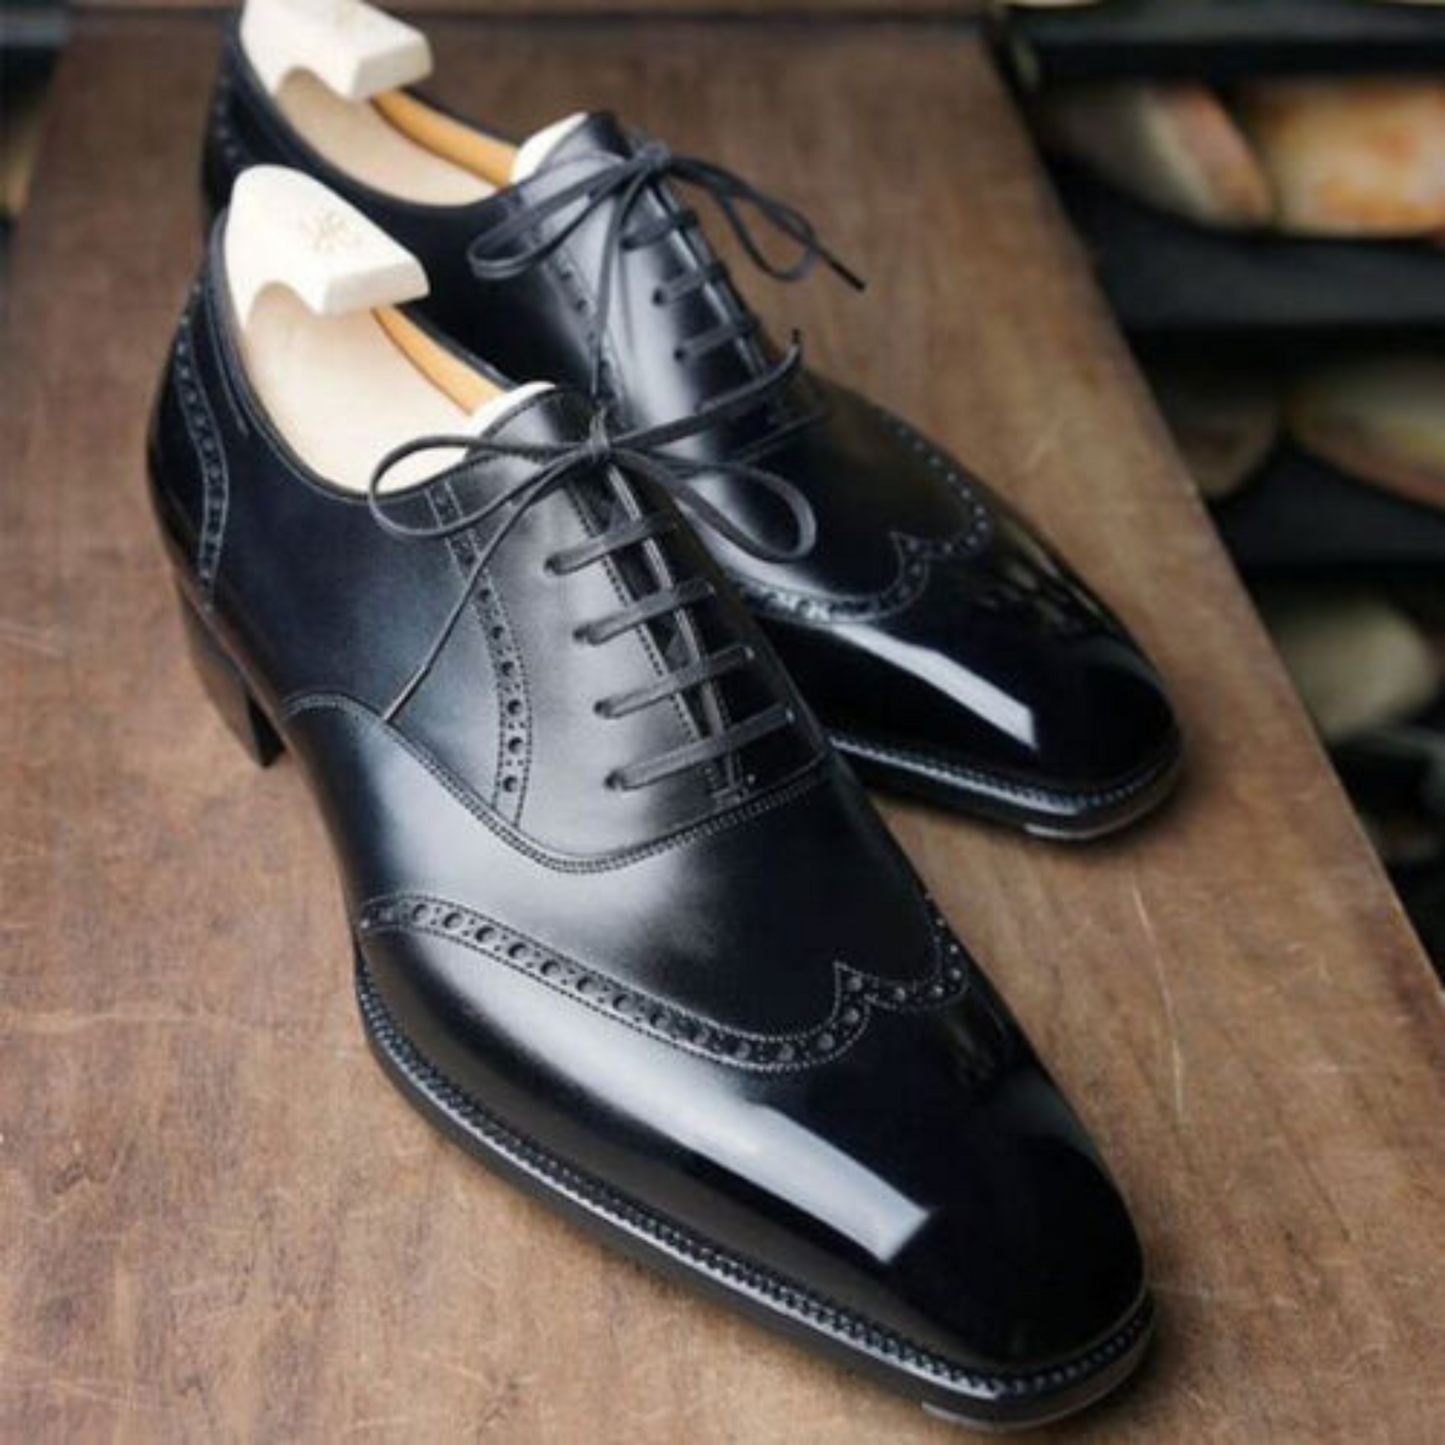 Tailor Made Handmade Genuine Black Leather Oxford Lace Up Wingtip Dress Shoes